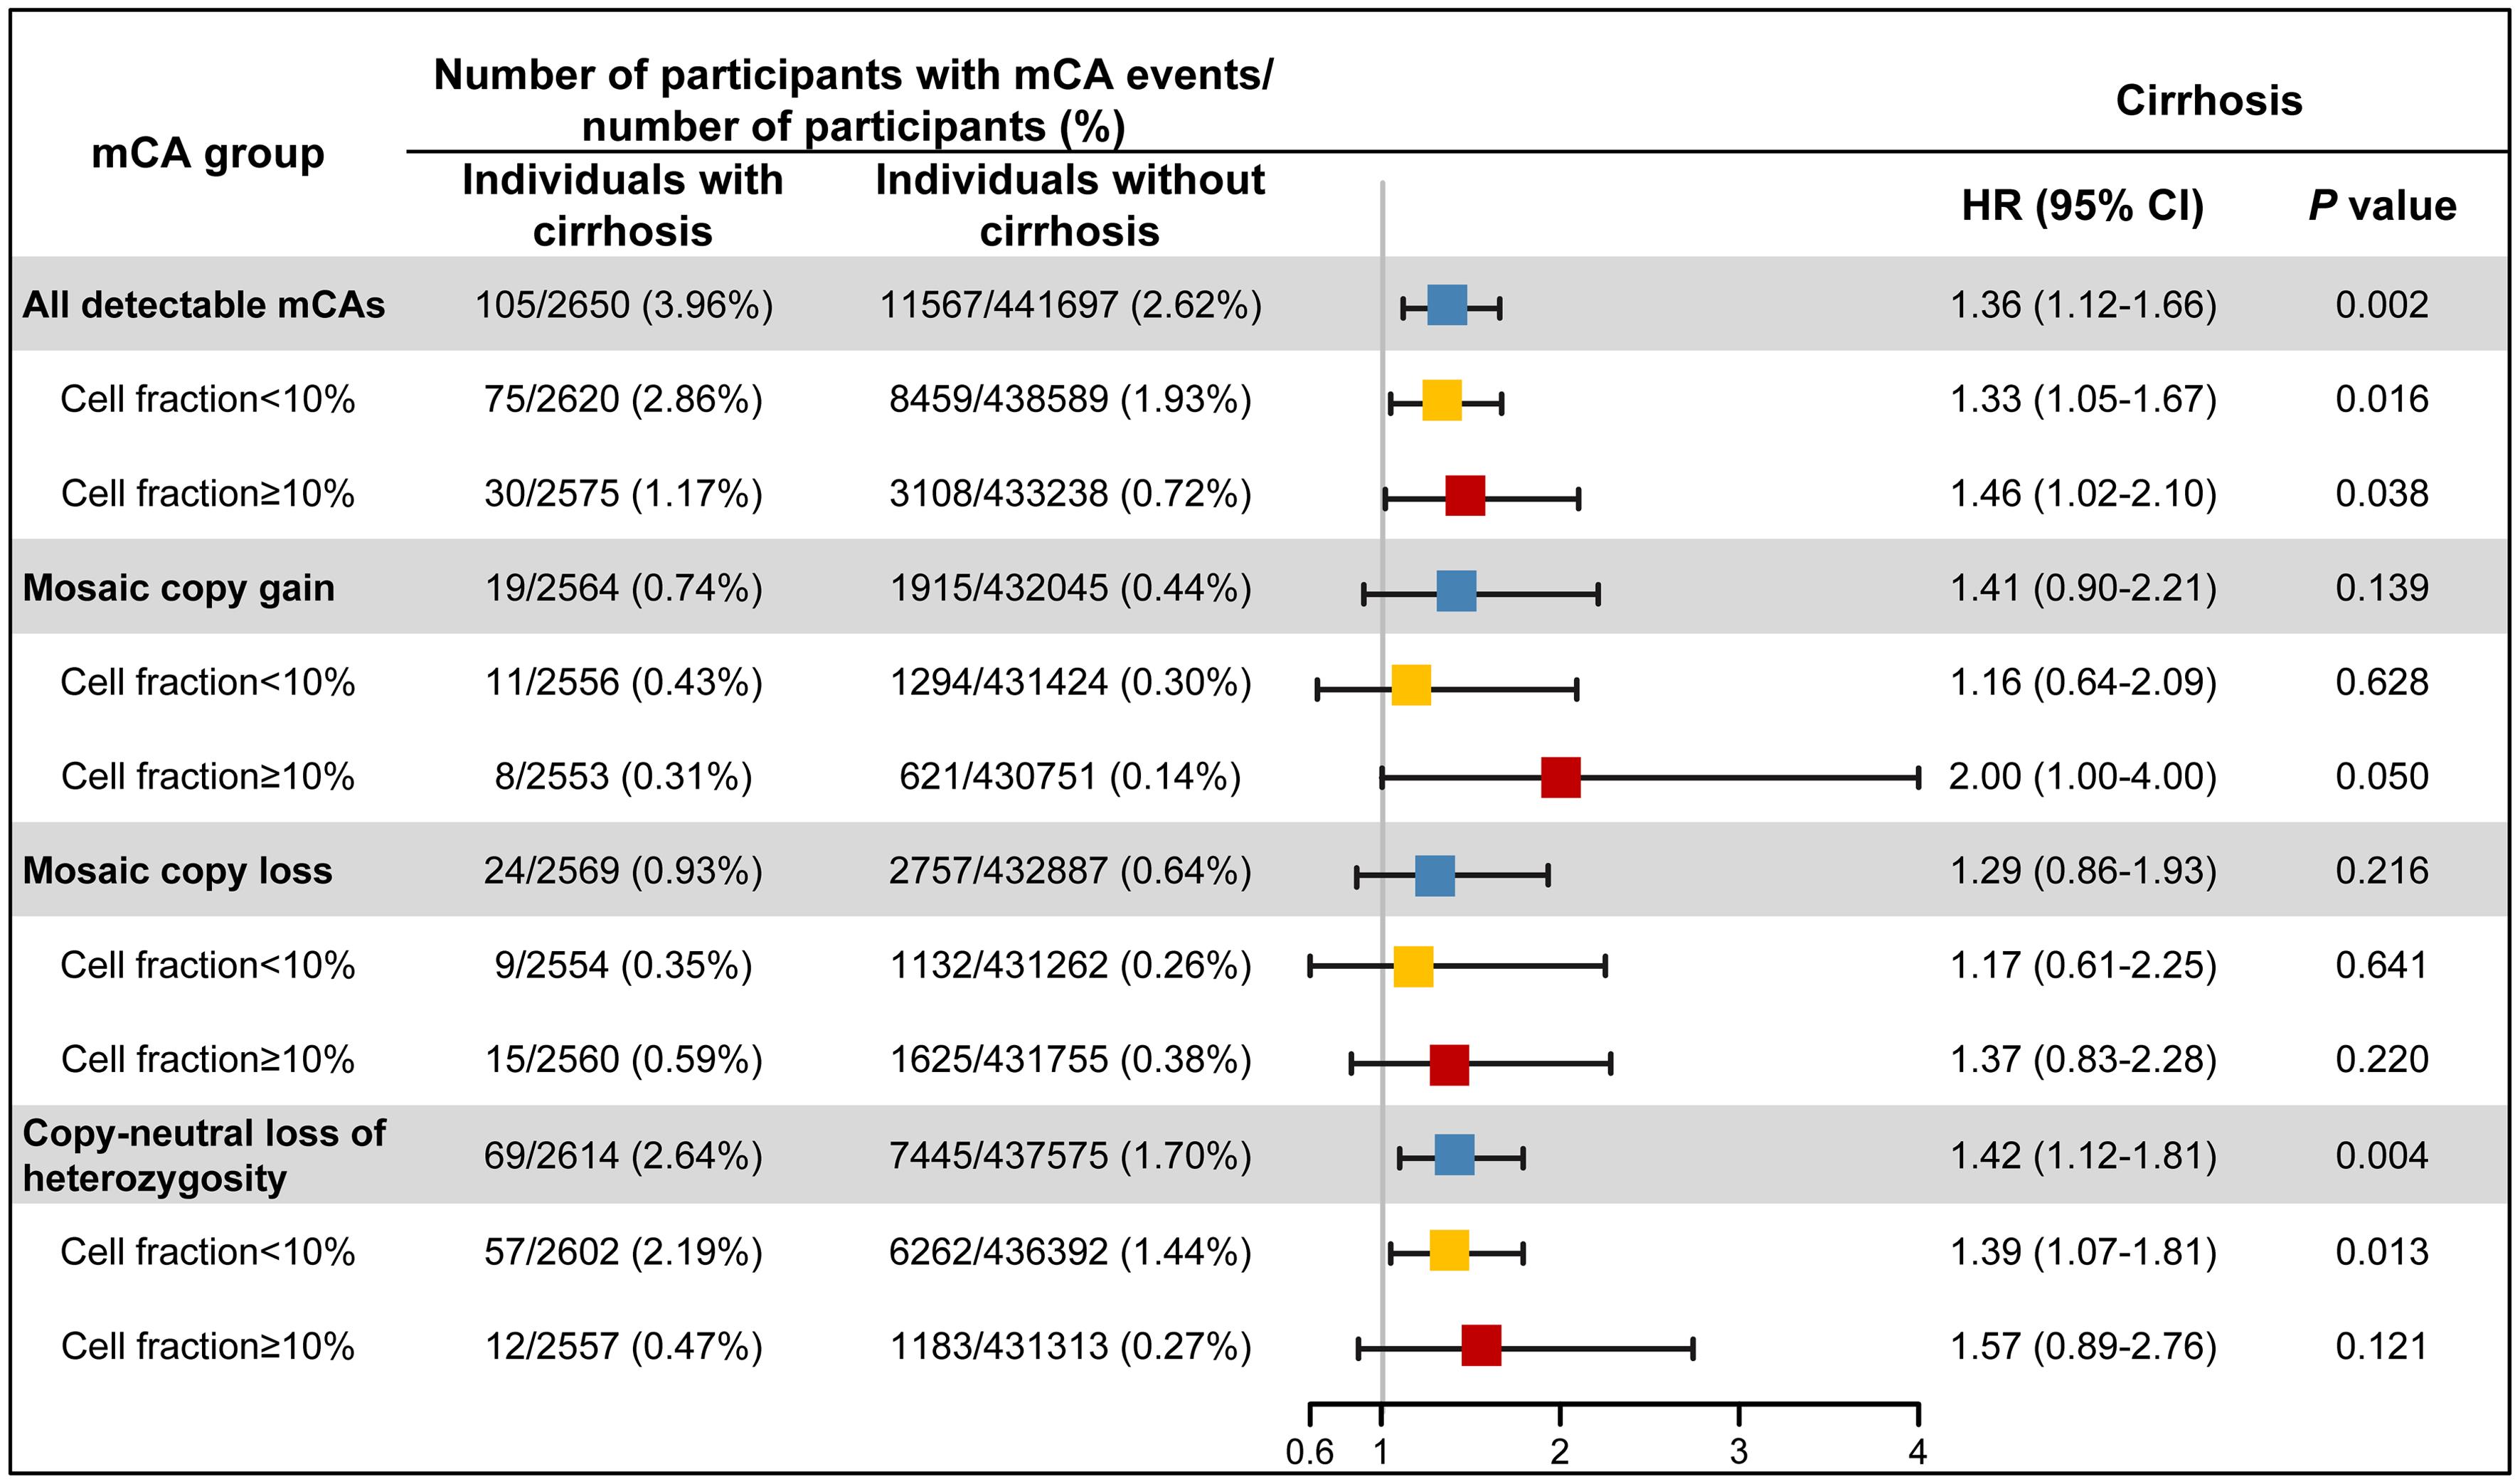 Associations of different types of mosaic chromosomal alterations (mCAs) with the risk of cirrhosis.